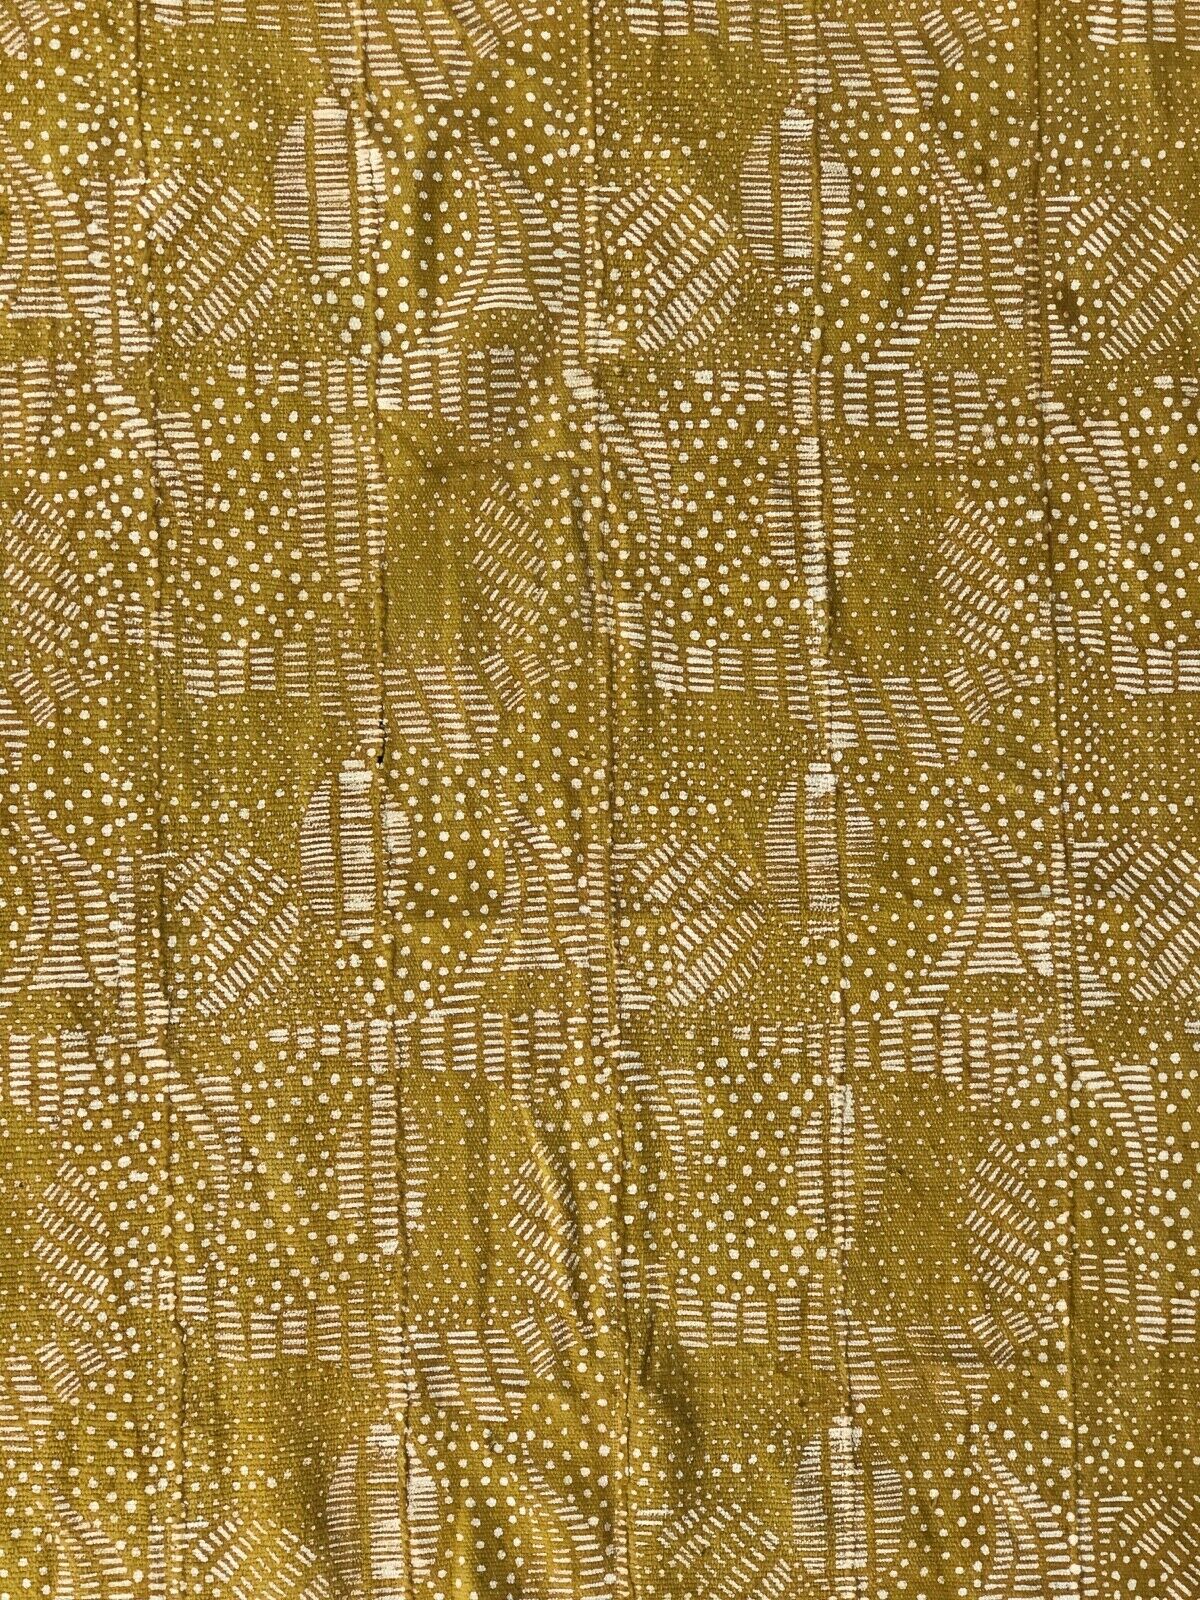 African Large Mustard & White Mud Cloth Textile Mali 62" by 42" # 3001